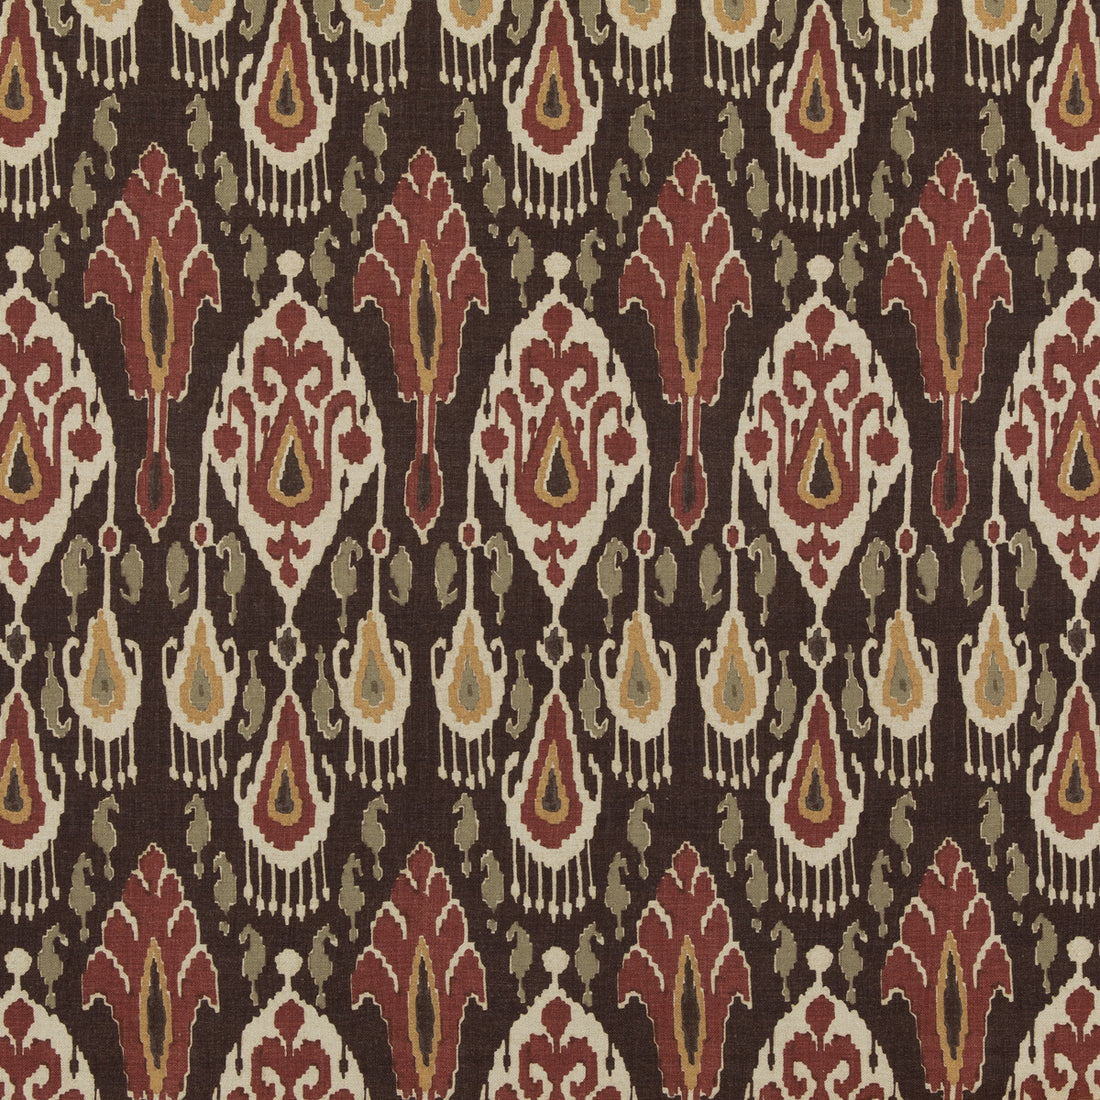 Ikat Bokhara fabric in espresso color - pattern BP10853.6.0 - by G P &amp; J Baker in the Chifu collection